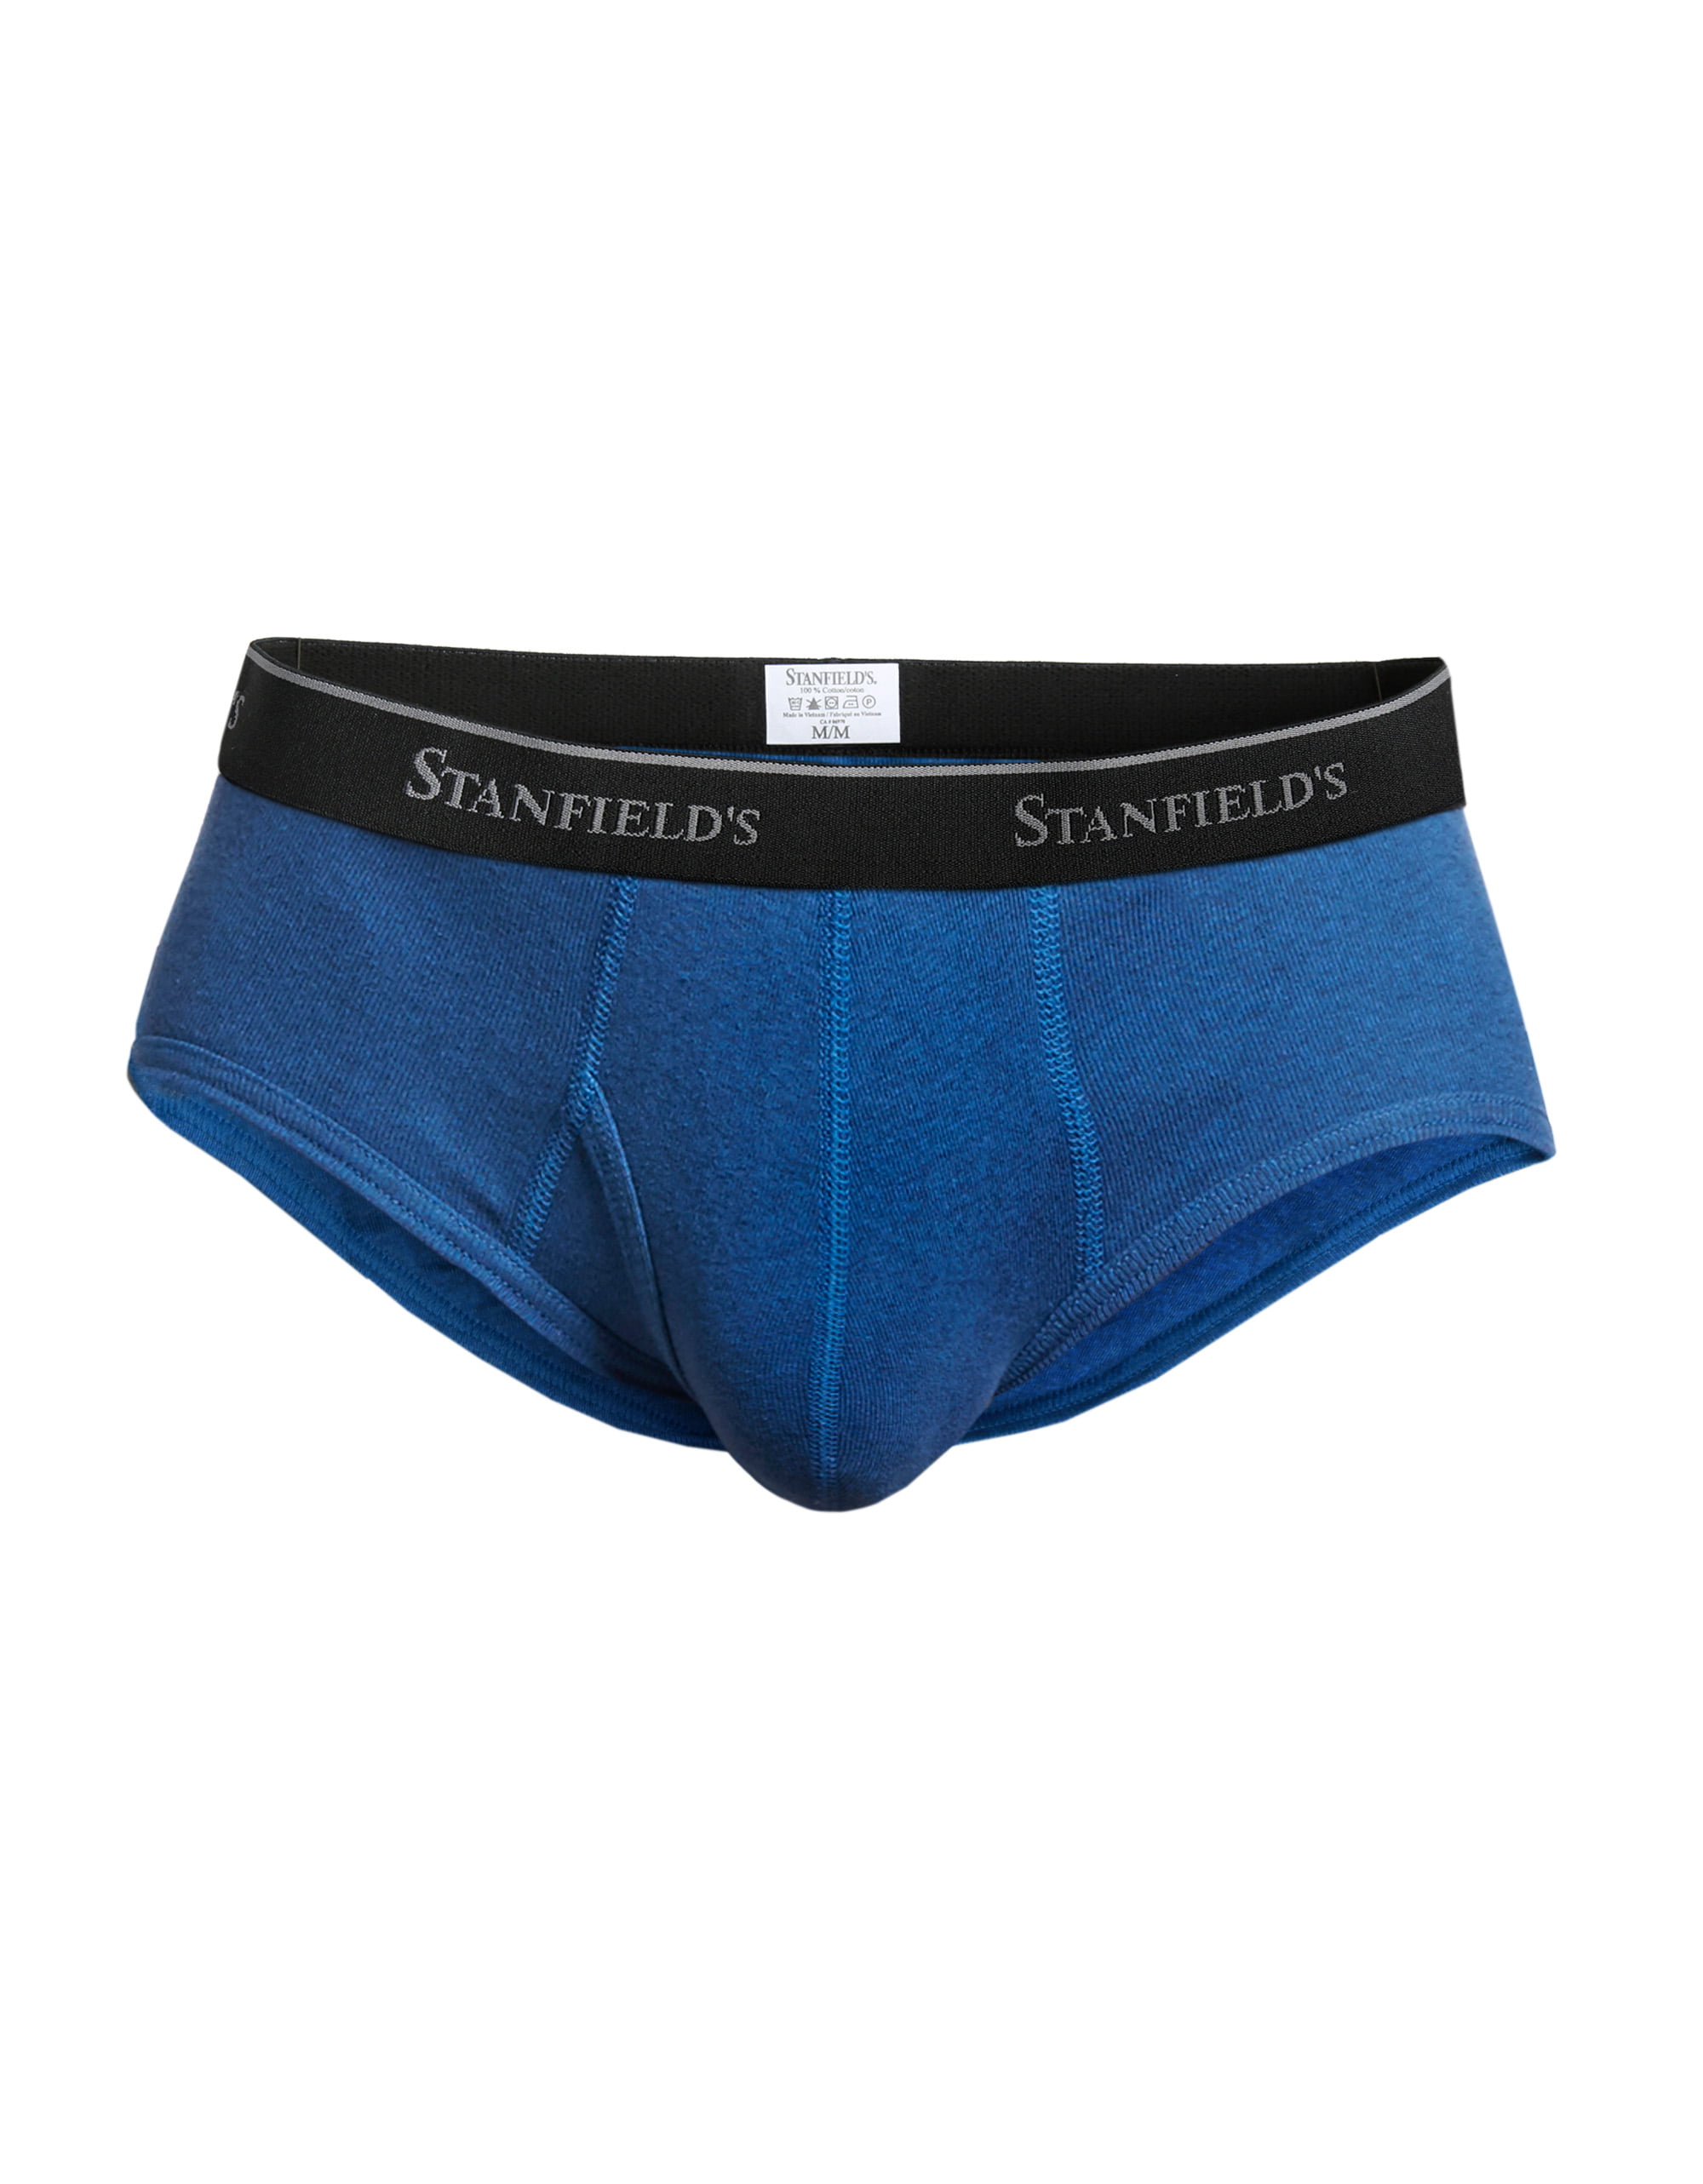  Stanfield's Men's Fx28-147-S, Electric Blue, Small